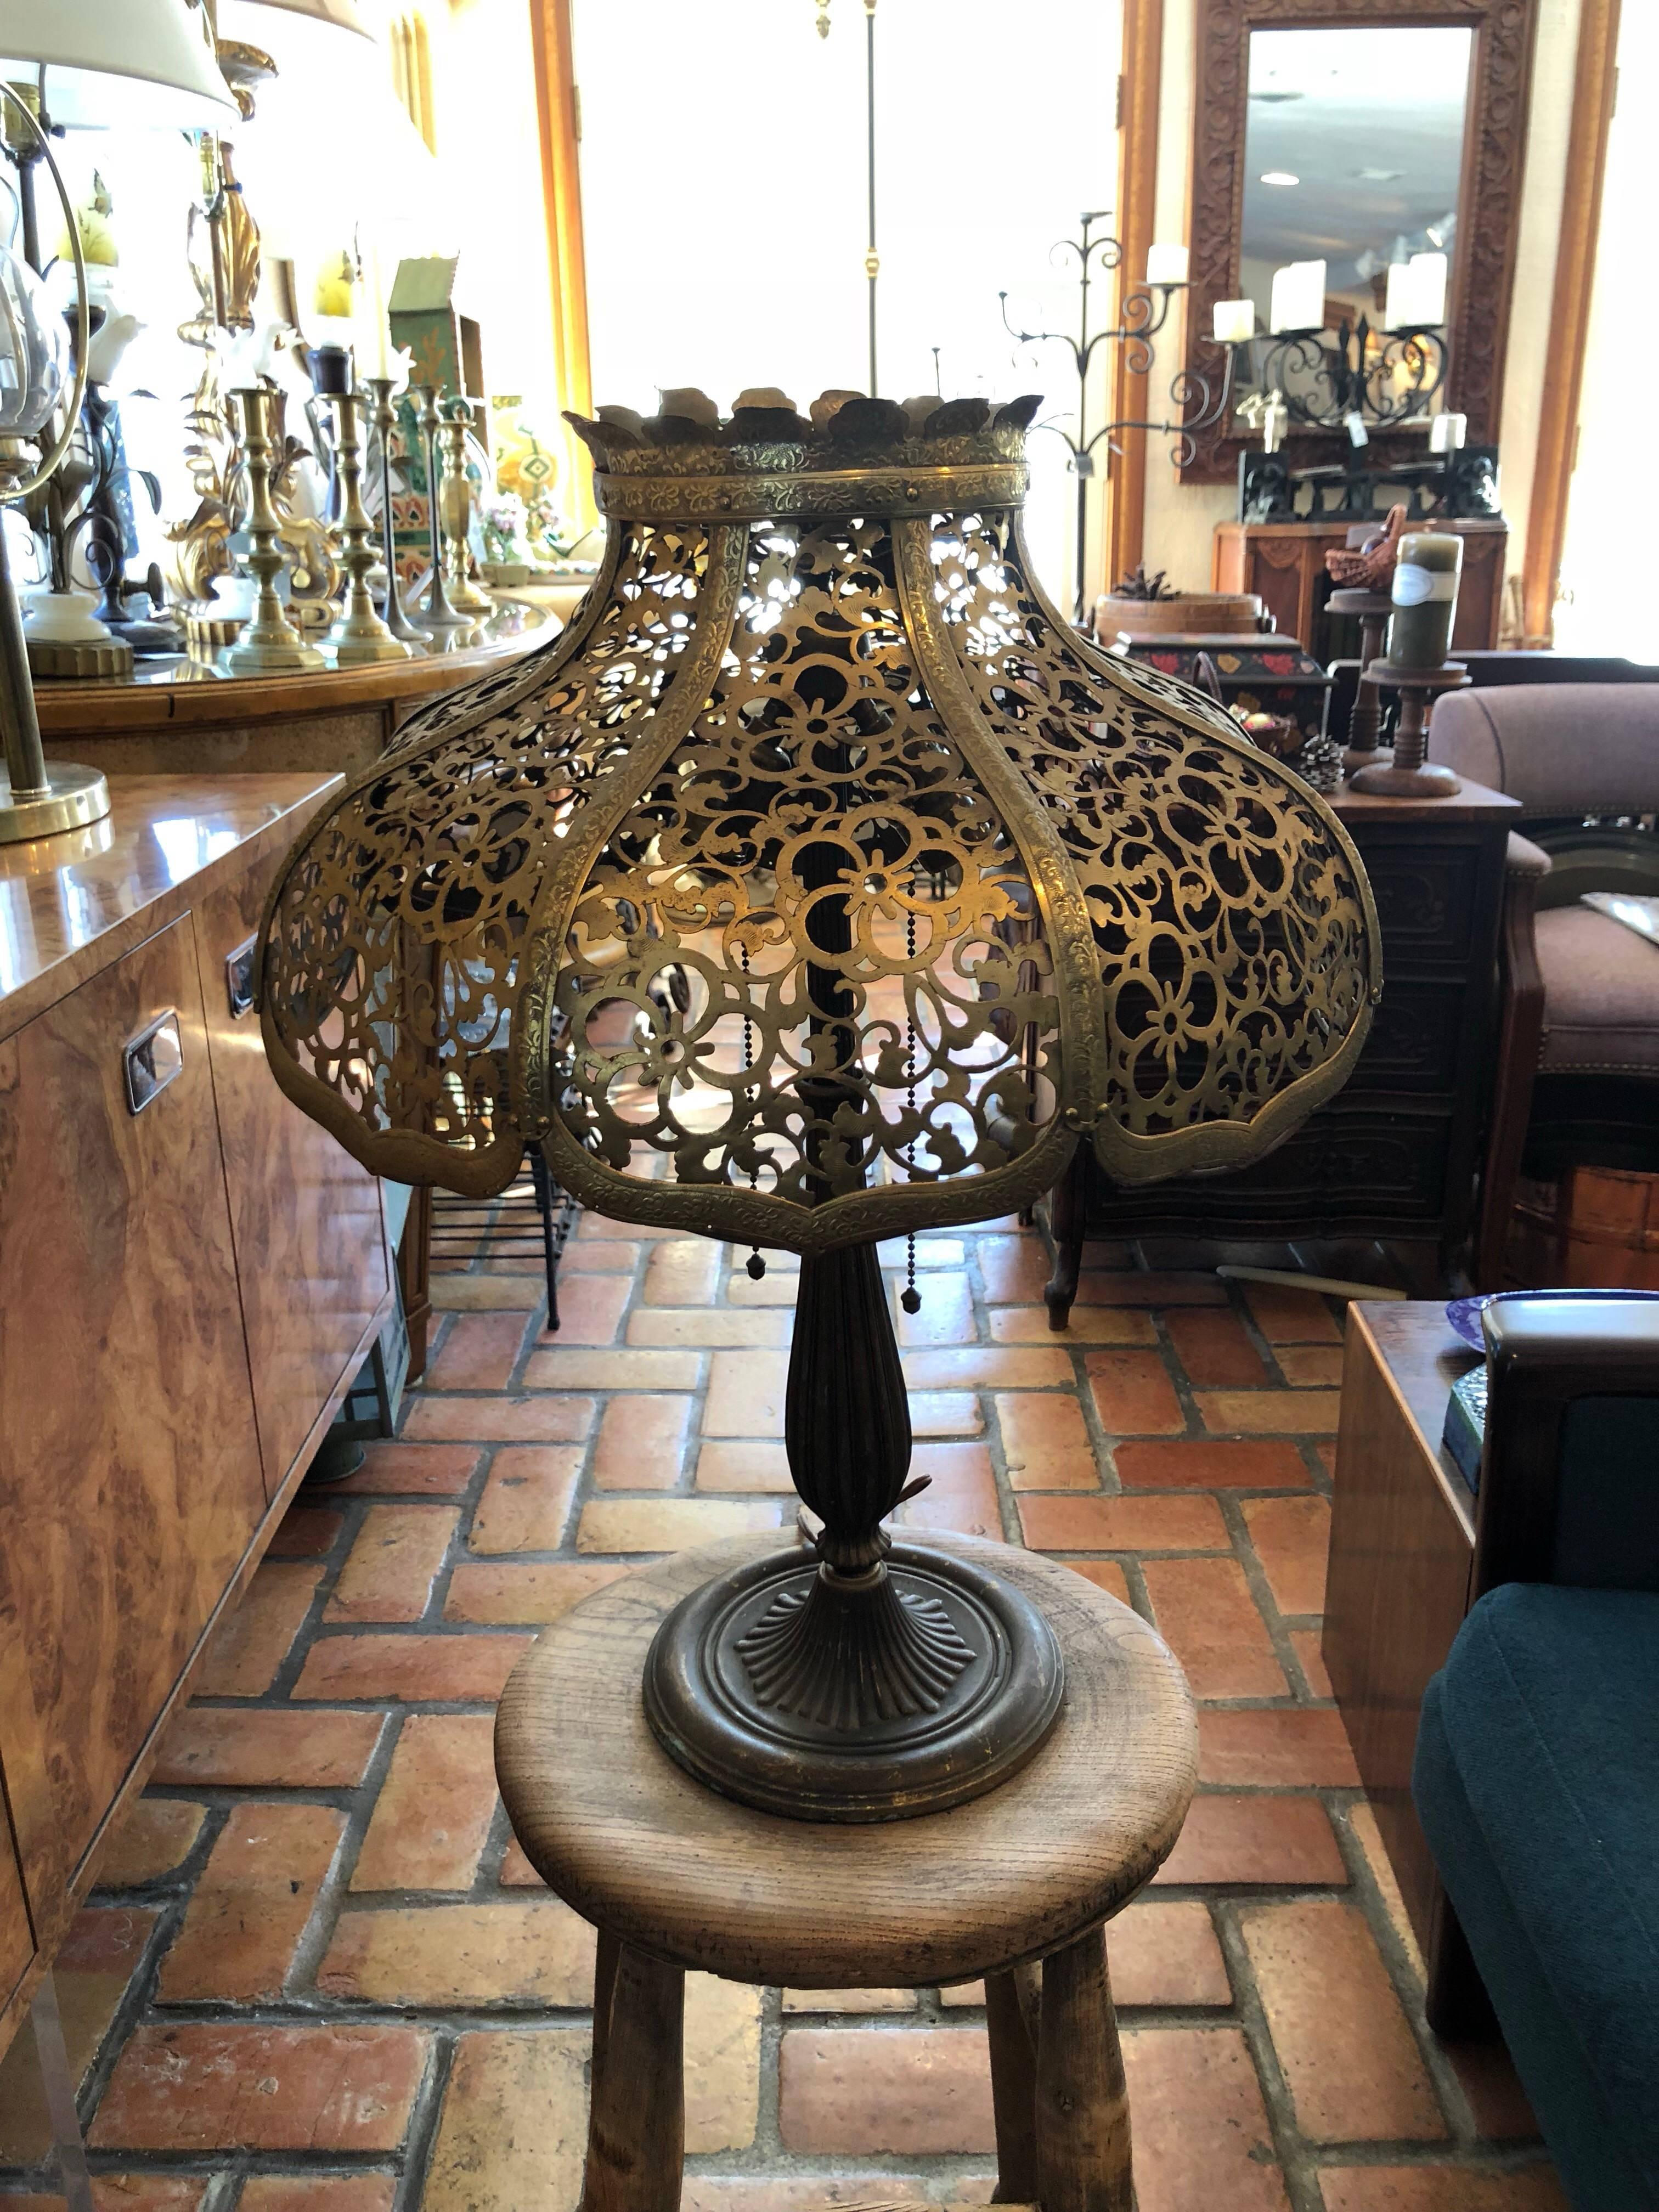 Antique gilt metal lamp with pierced shade by Edward Miller.
Lamp base signed E.M.Miller. Not sure if shade is original to base. 
Pierced shade may have originally been silk lined. Stamped 1150 underneath. Double socket with pull chains. Measures: